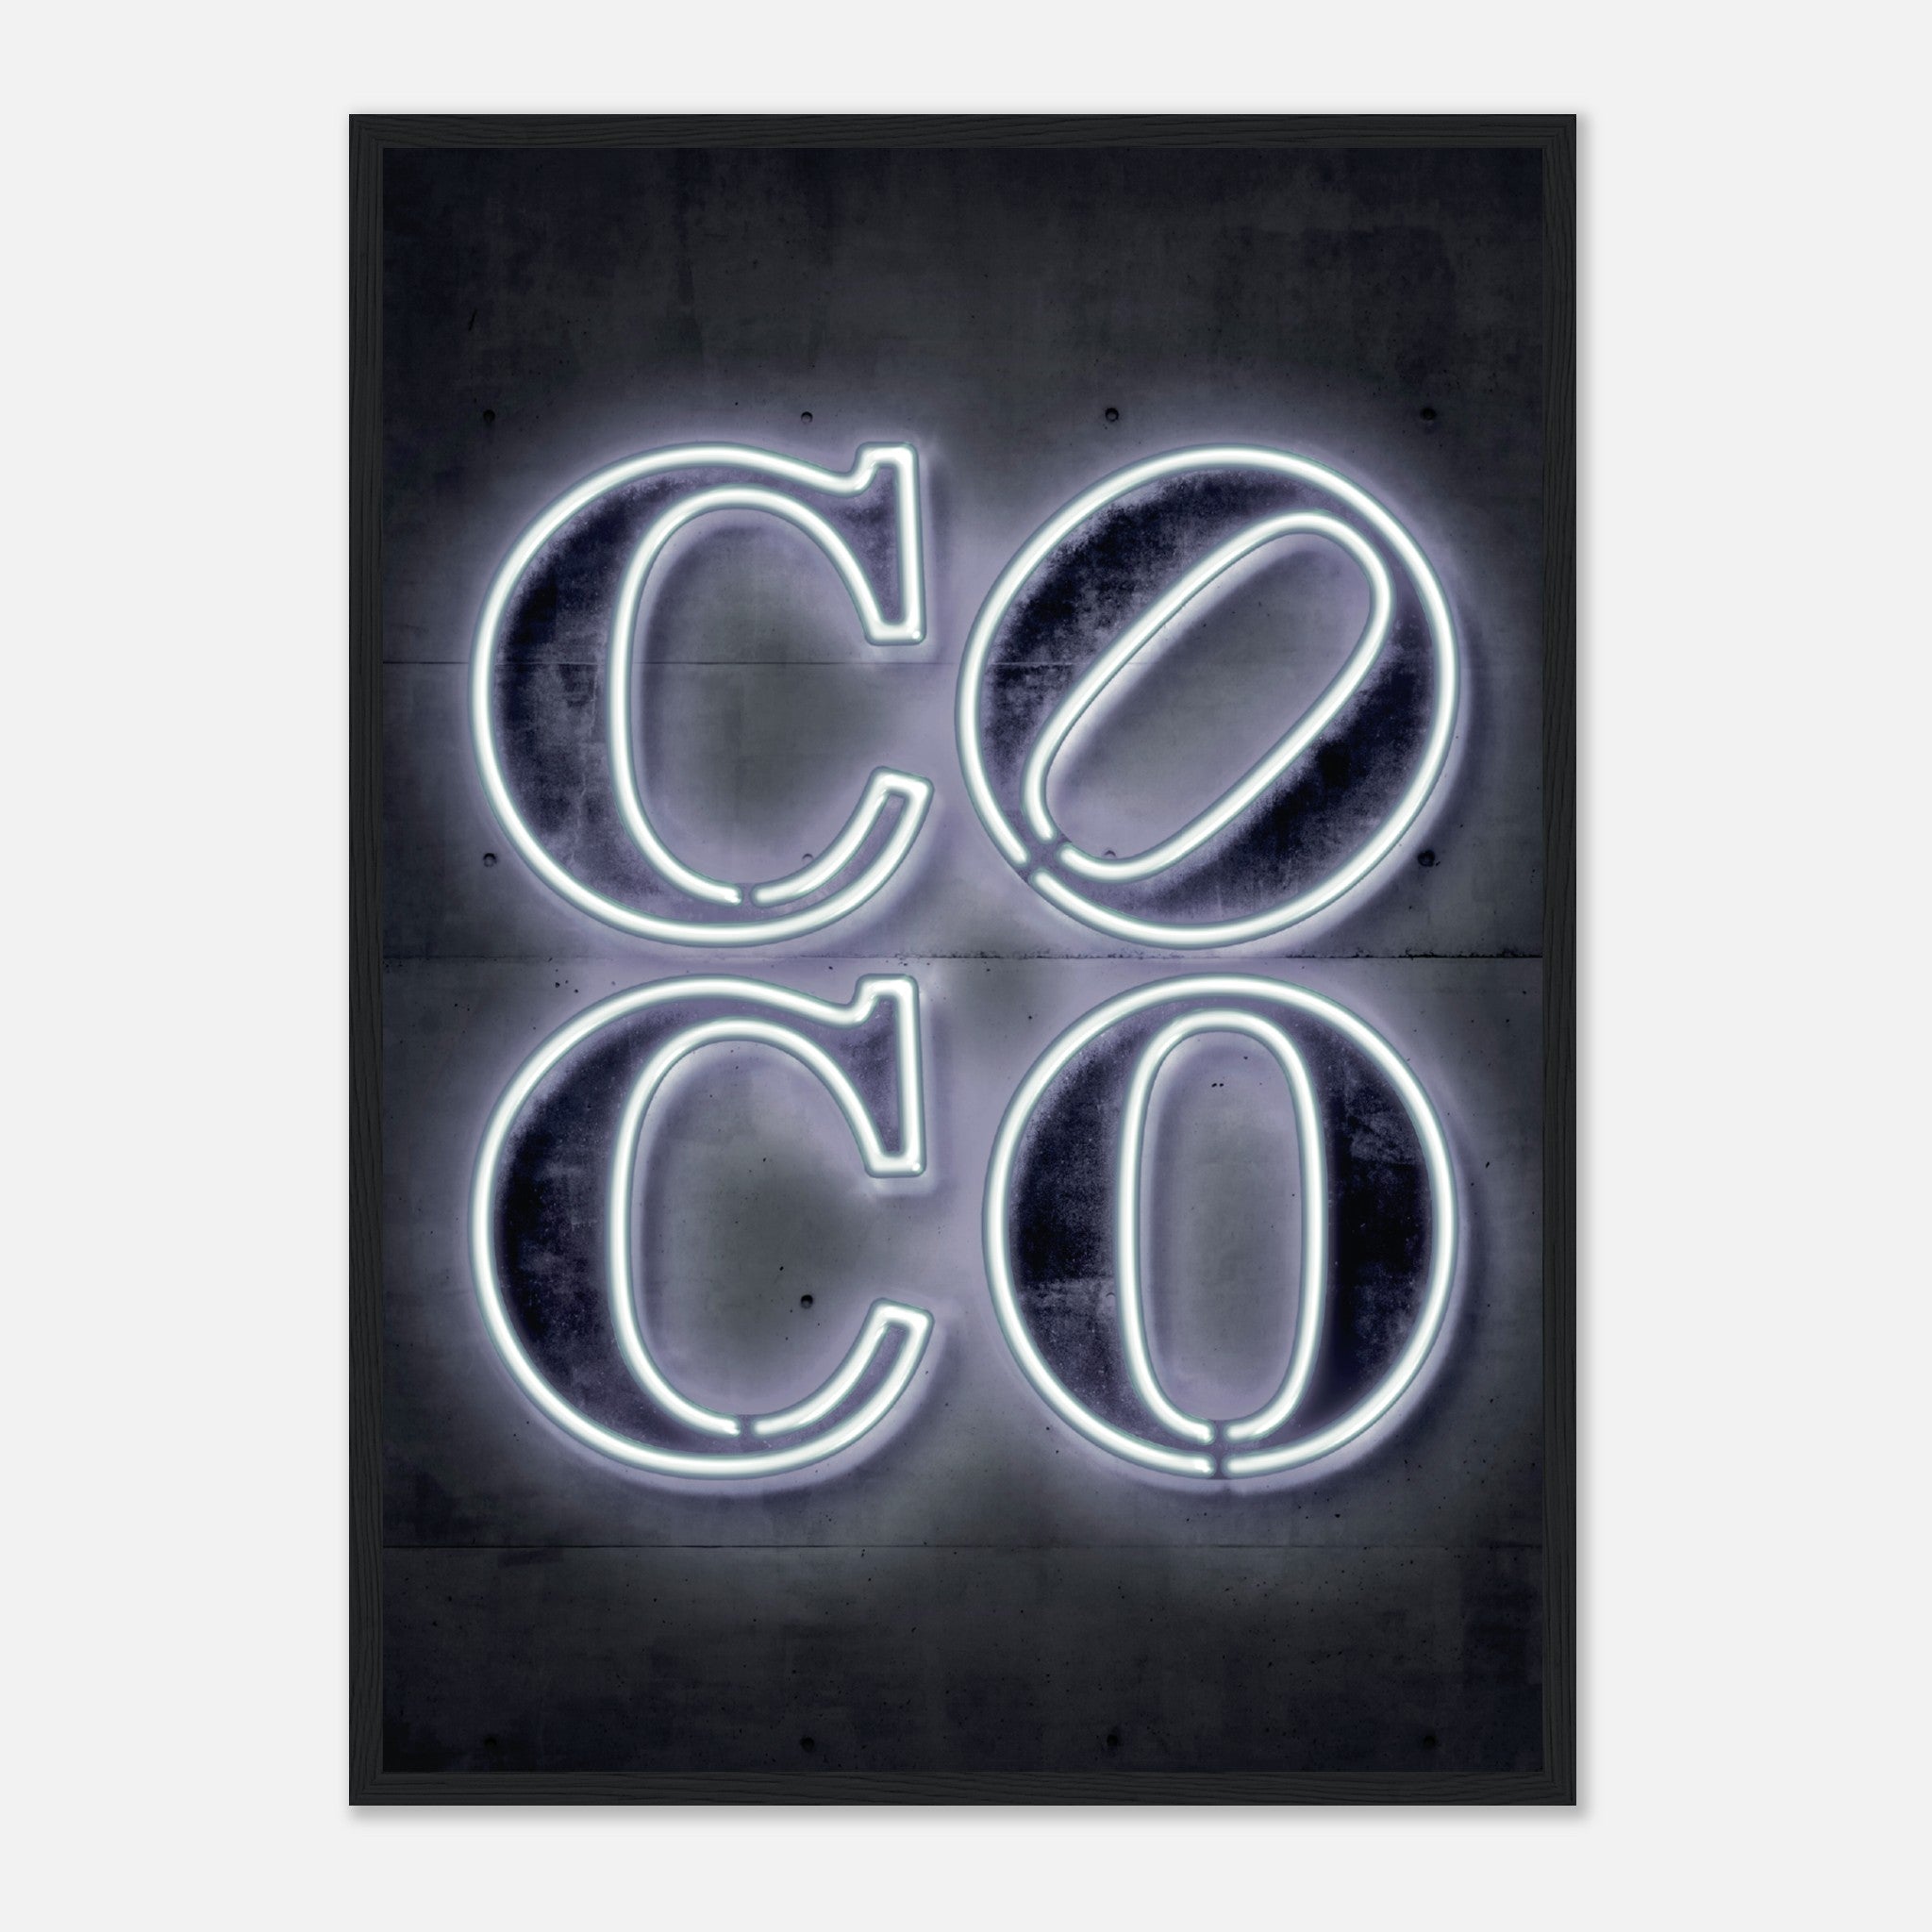 Coco 1 Poster